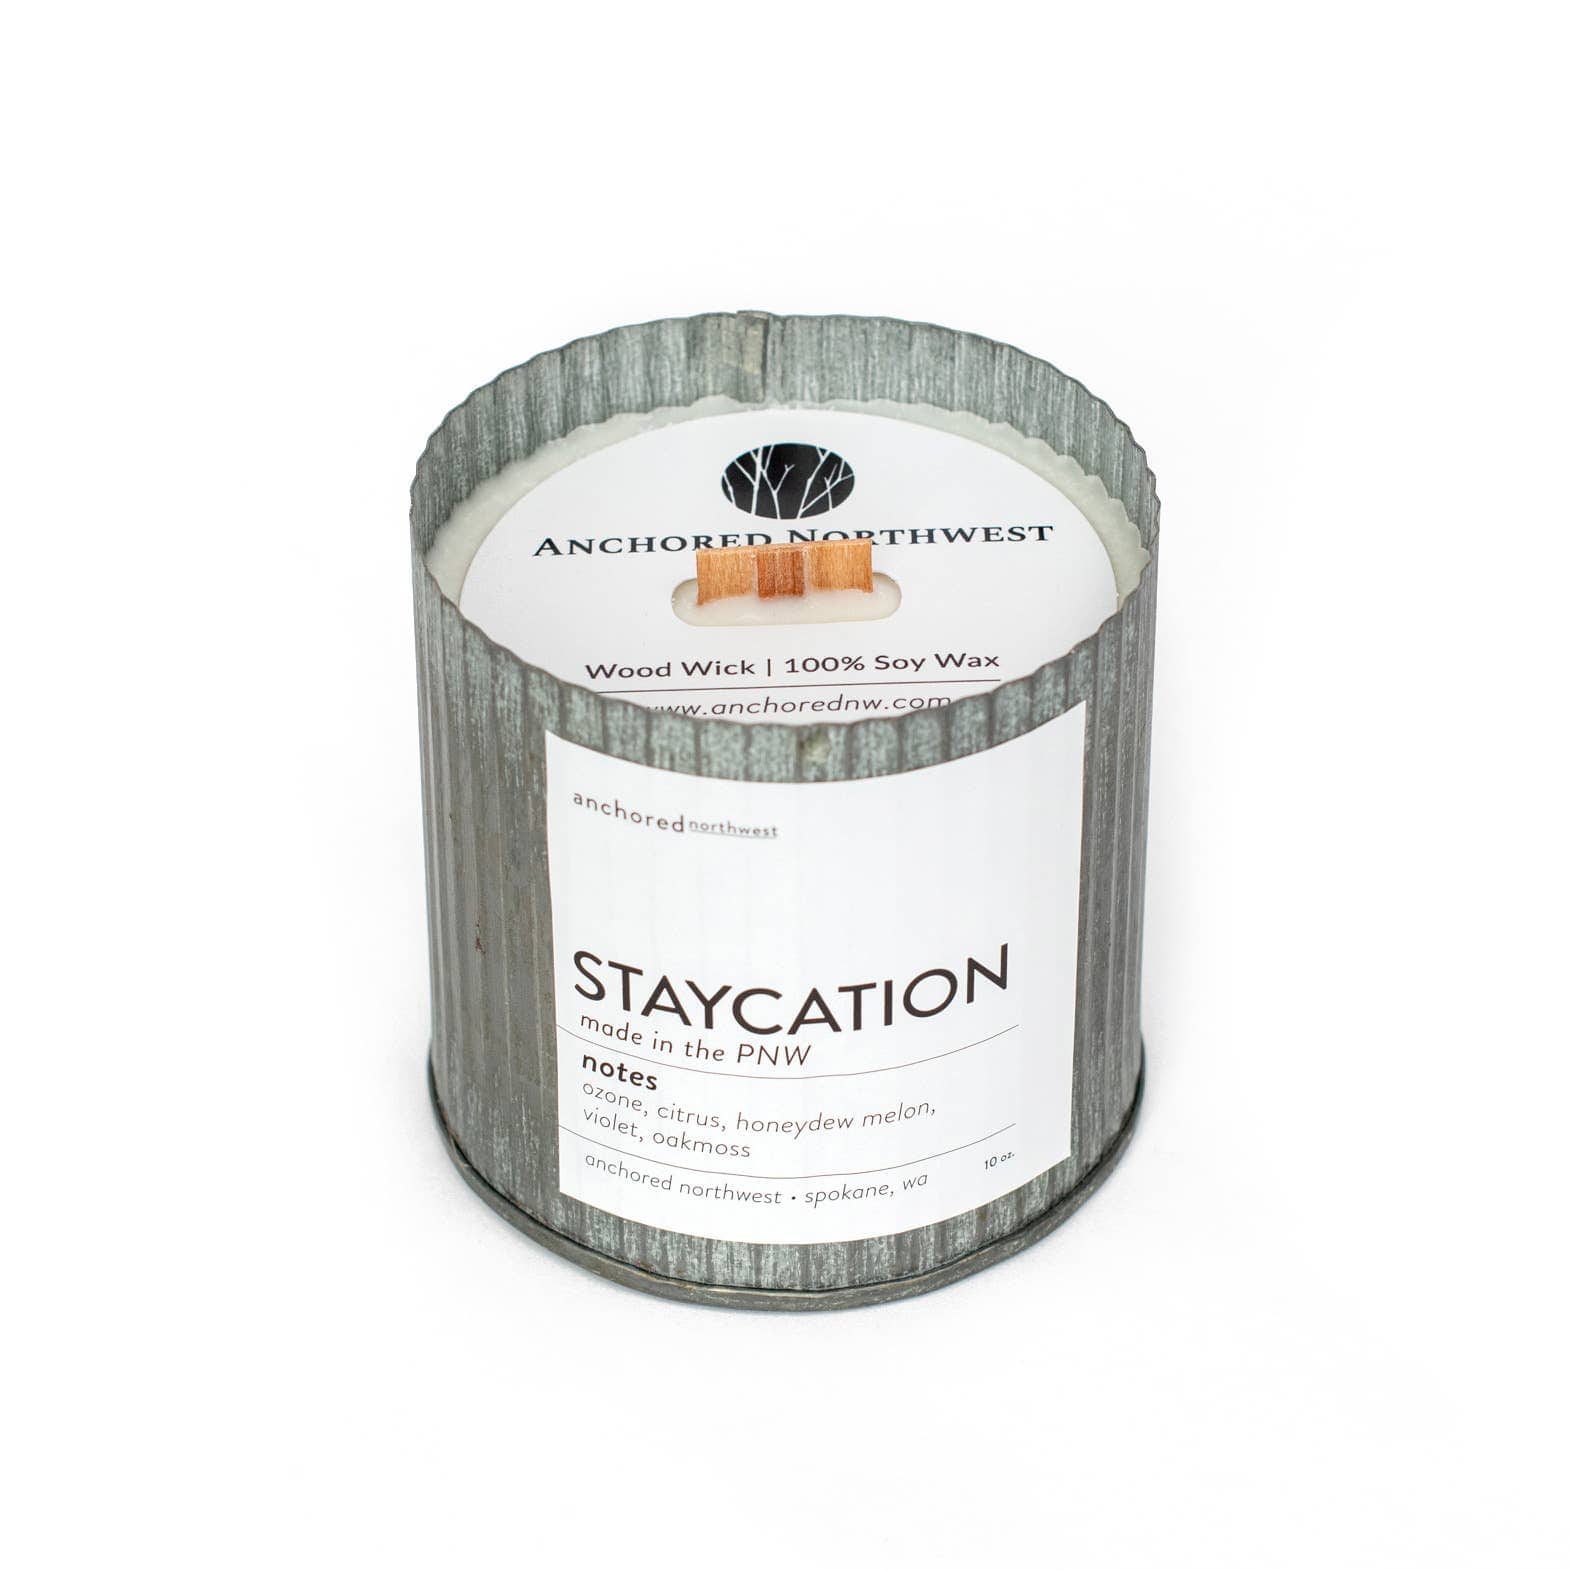 Anchored Northwest Staycation Wood Wick Rustic Farmhouse Soy Candle: 10oz